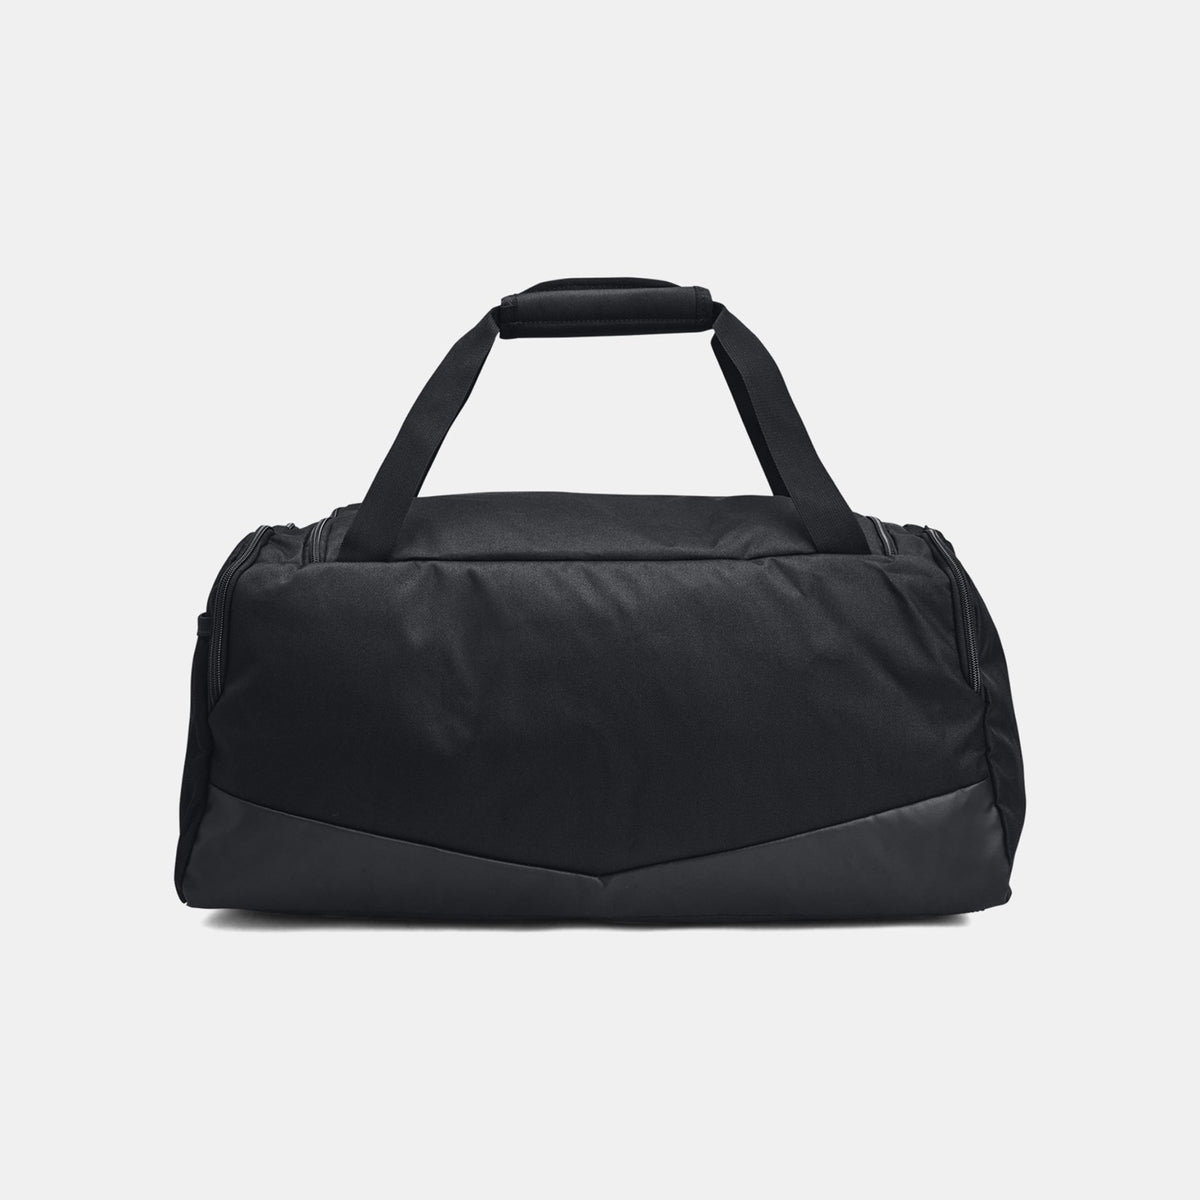 Under Armour Undeniable 5.0 Small Duffel Bag: Black